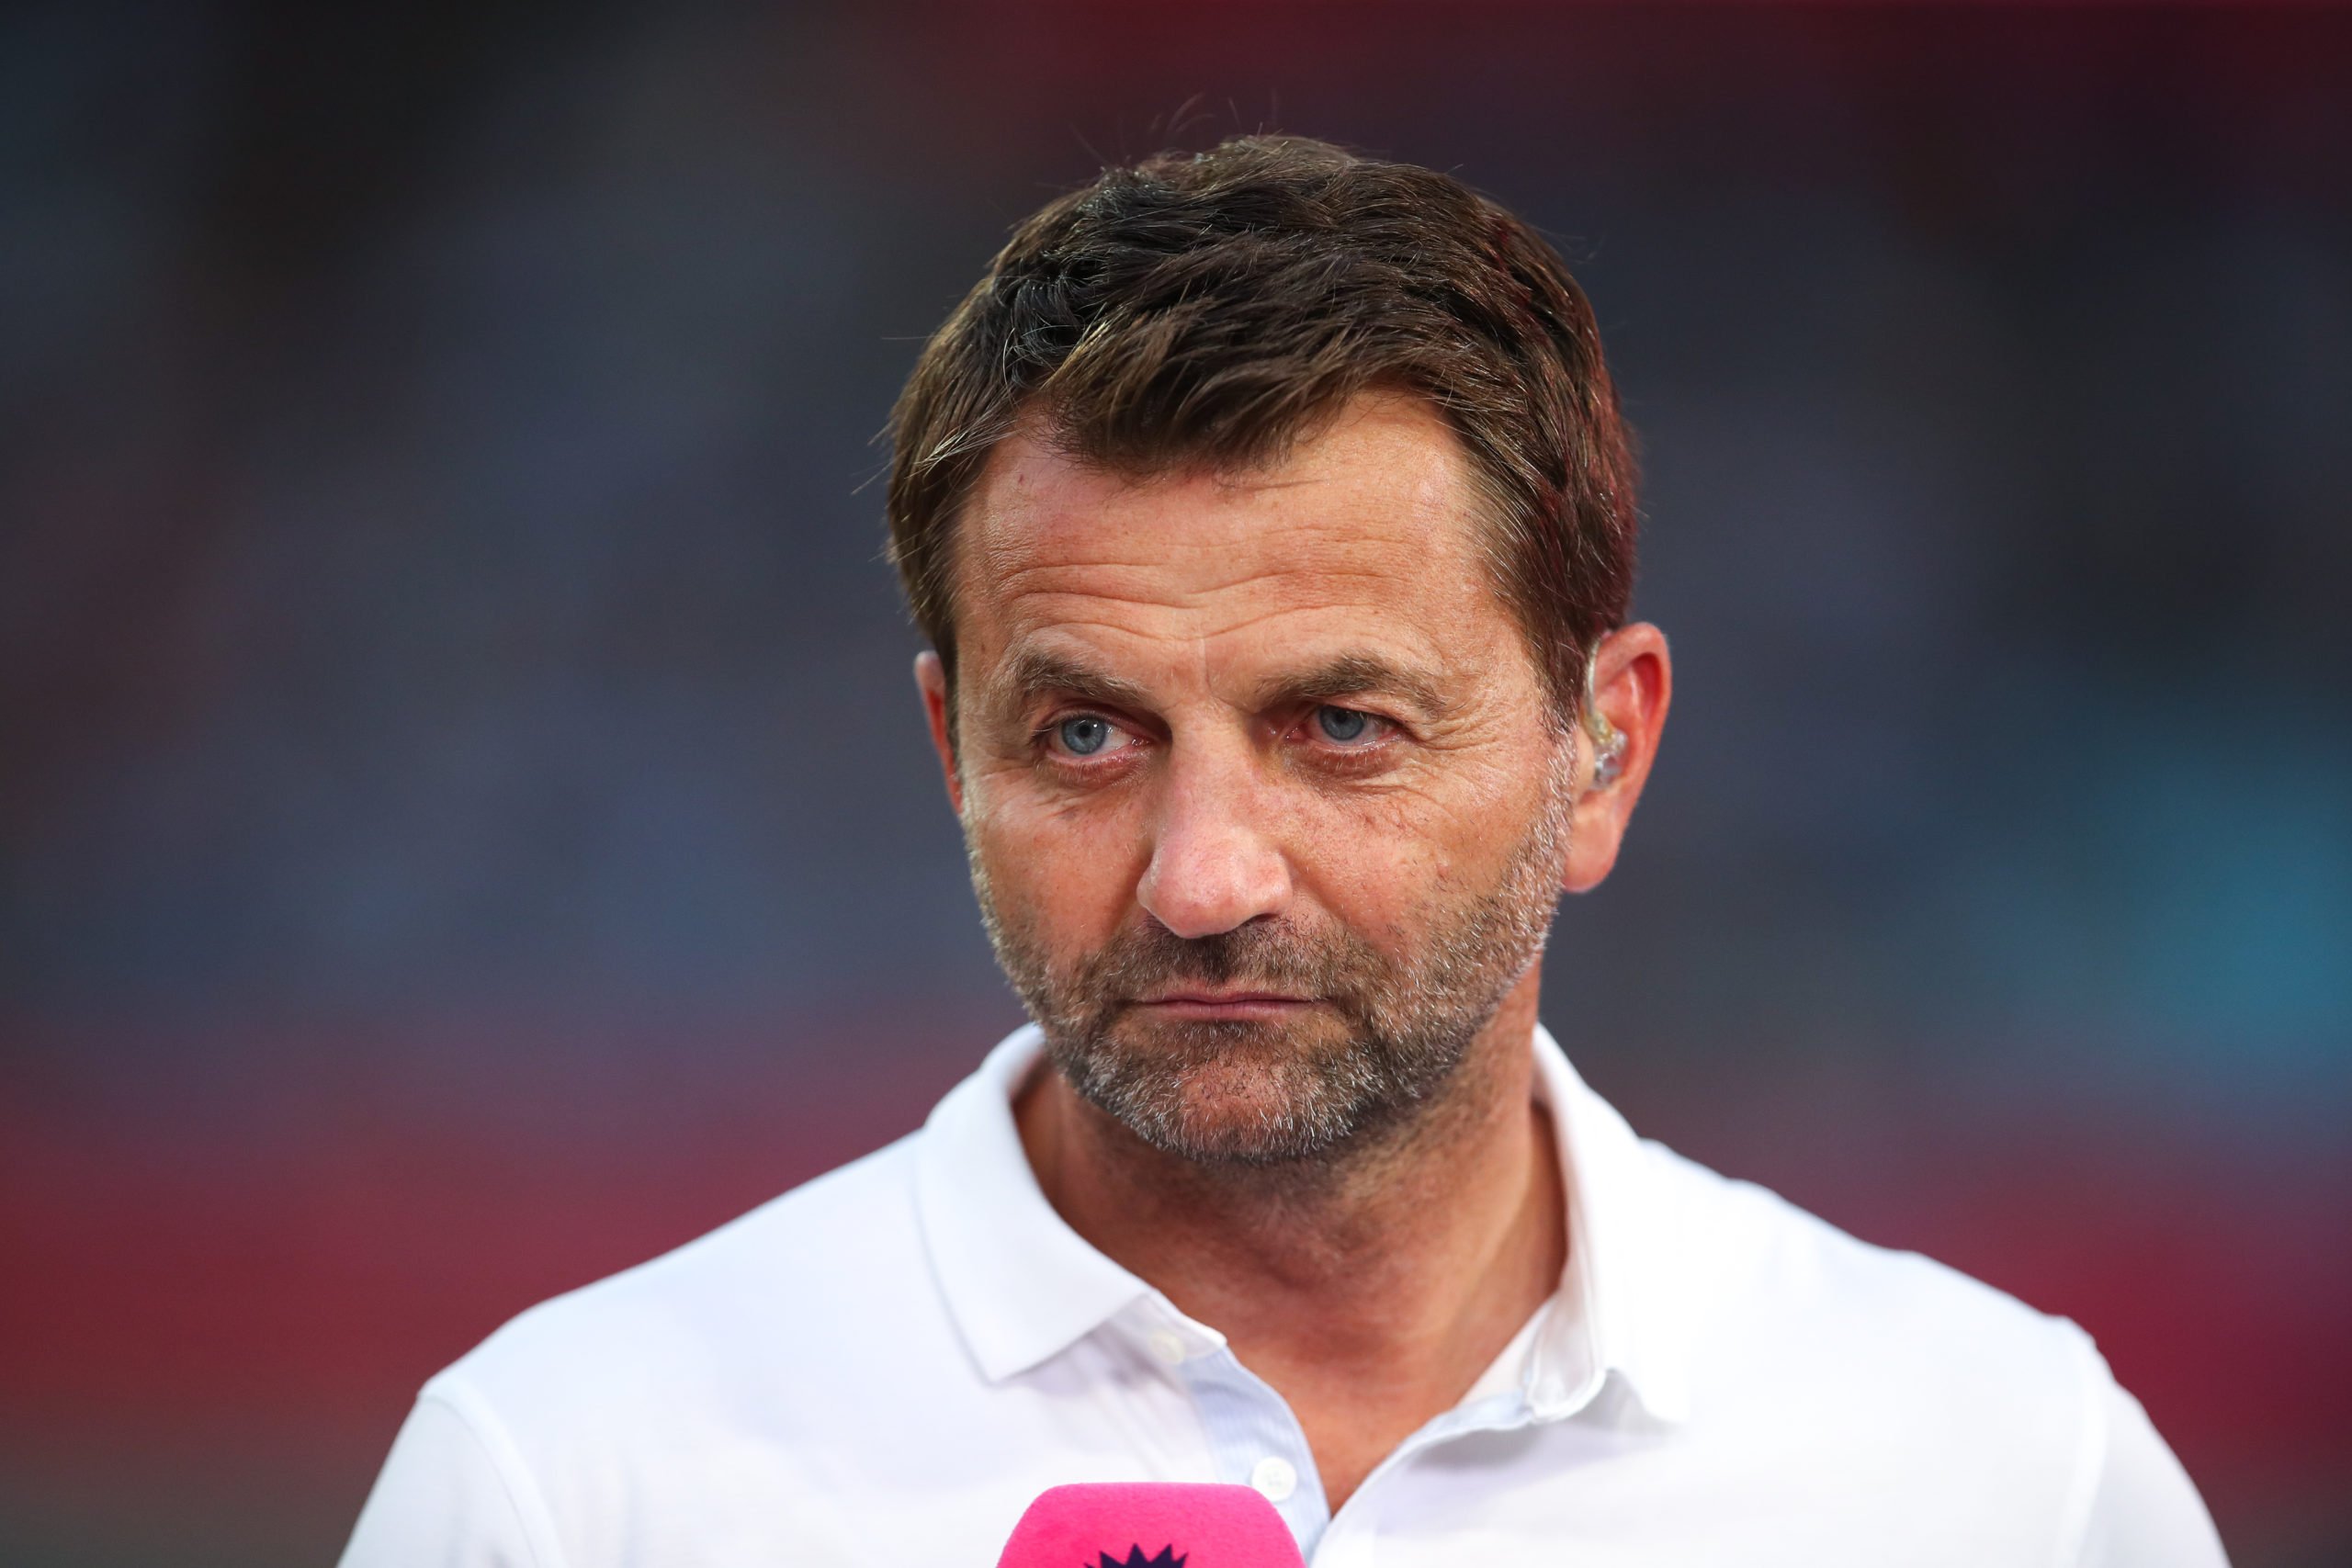 'He's been developed by Moyes': Tim Sherwood raves about 'immense' West Ham player